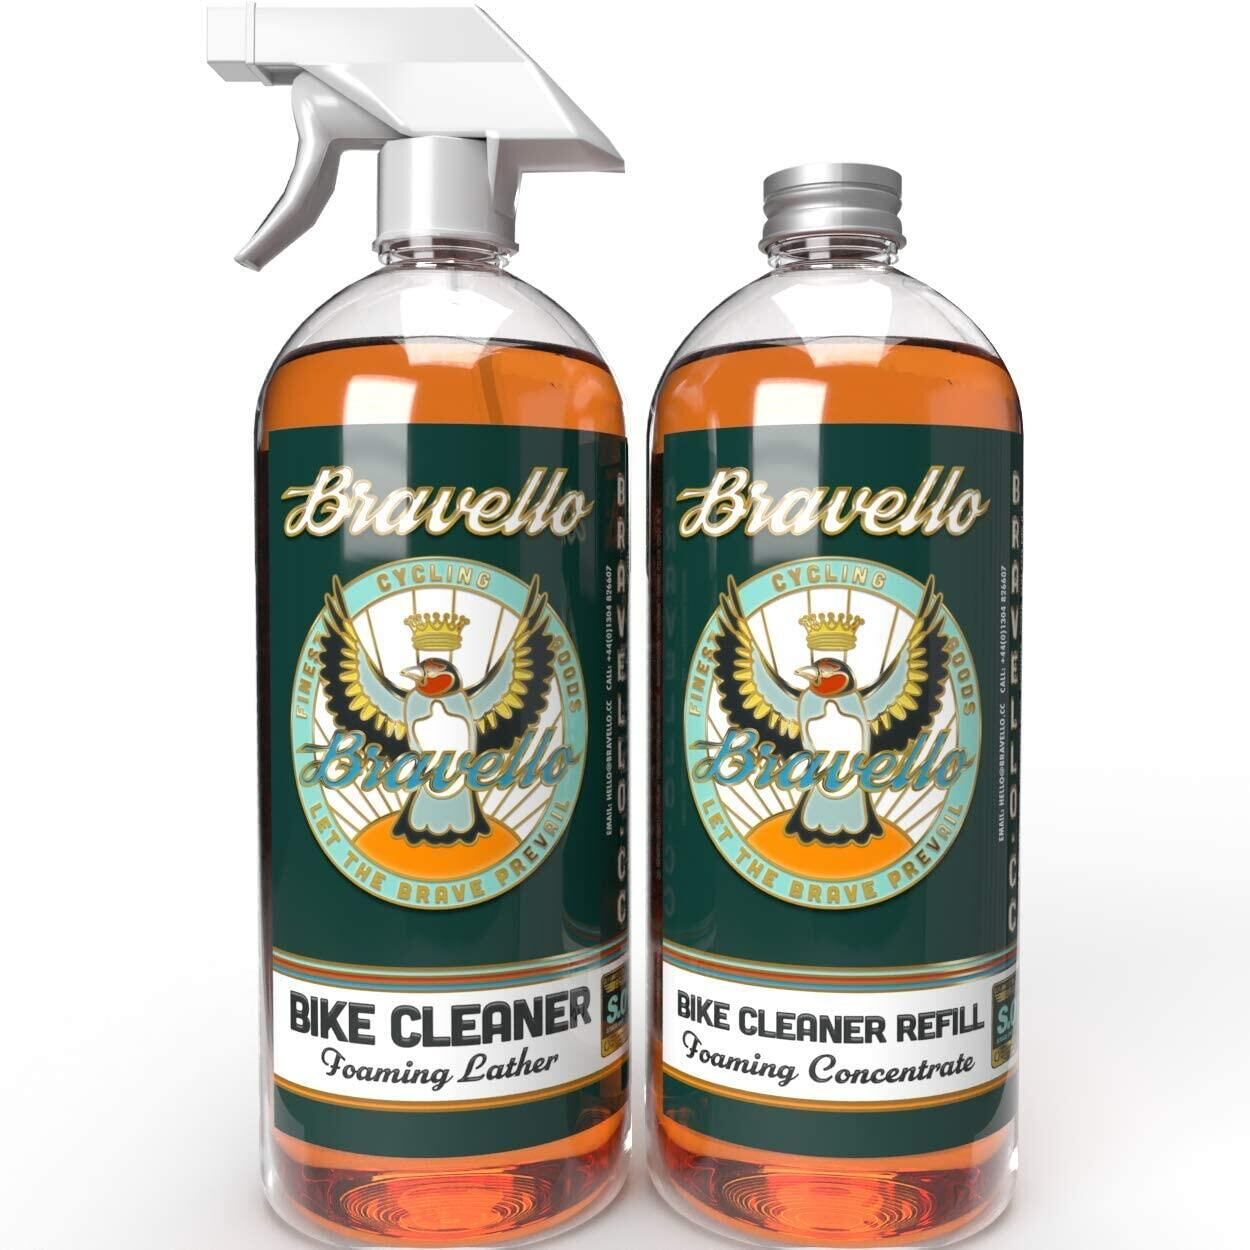 BRAVELLO Bravello Bike Cleaner Foaming Cleaning Spray & Concentrate Refill Degreaser (2L)